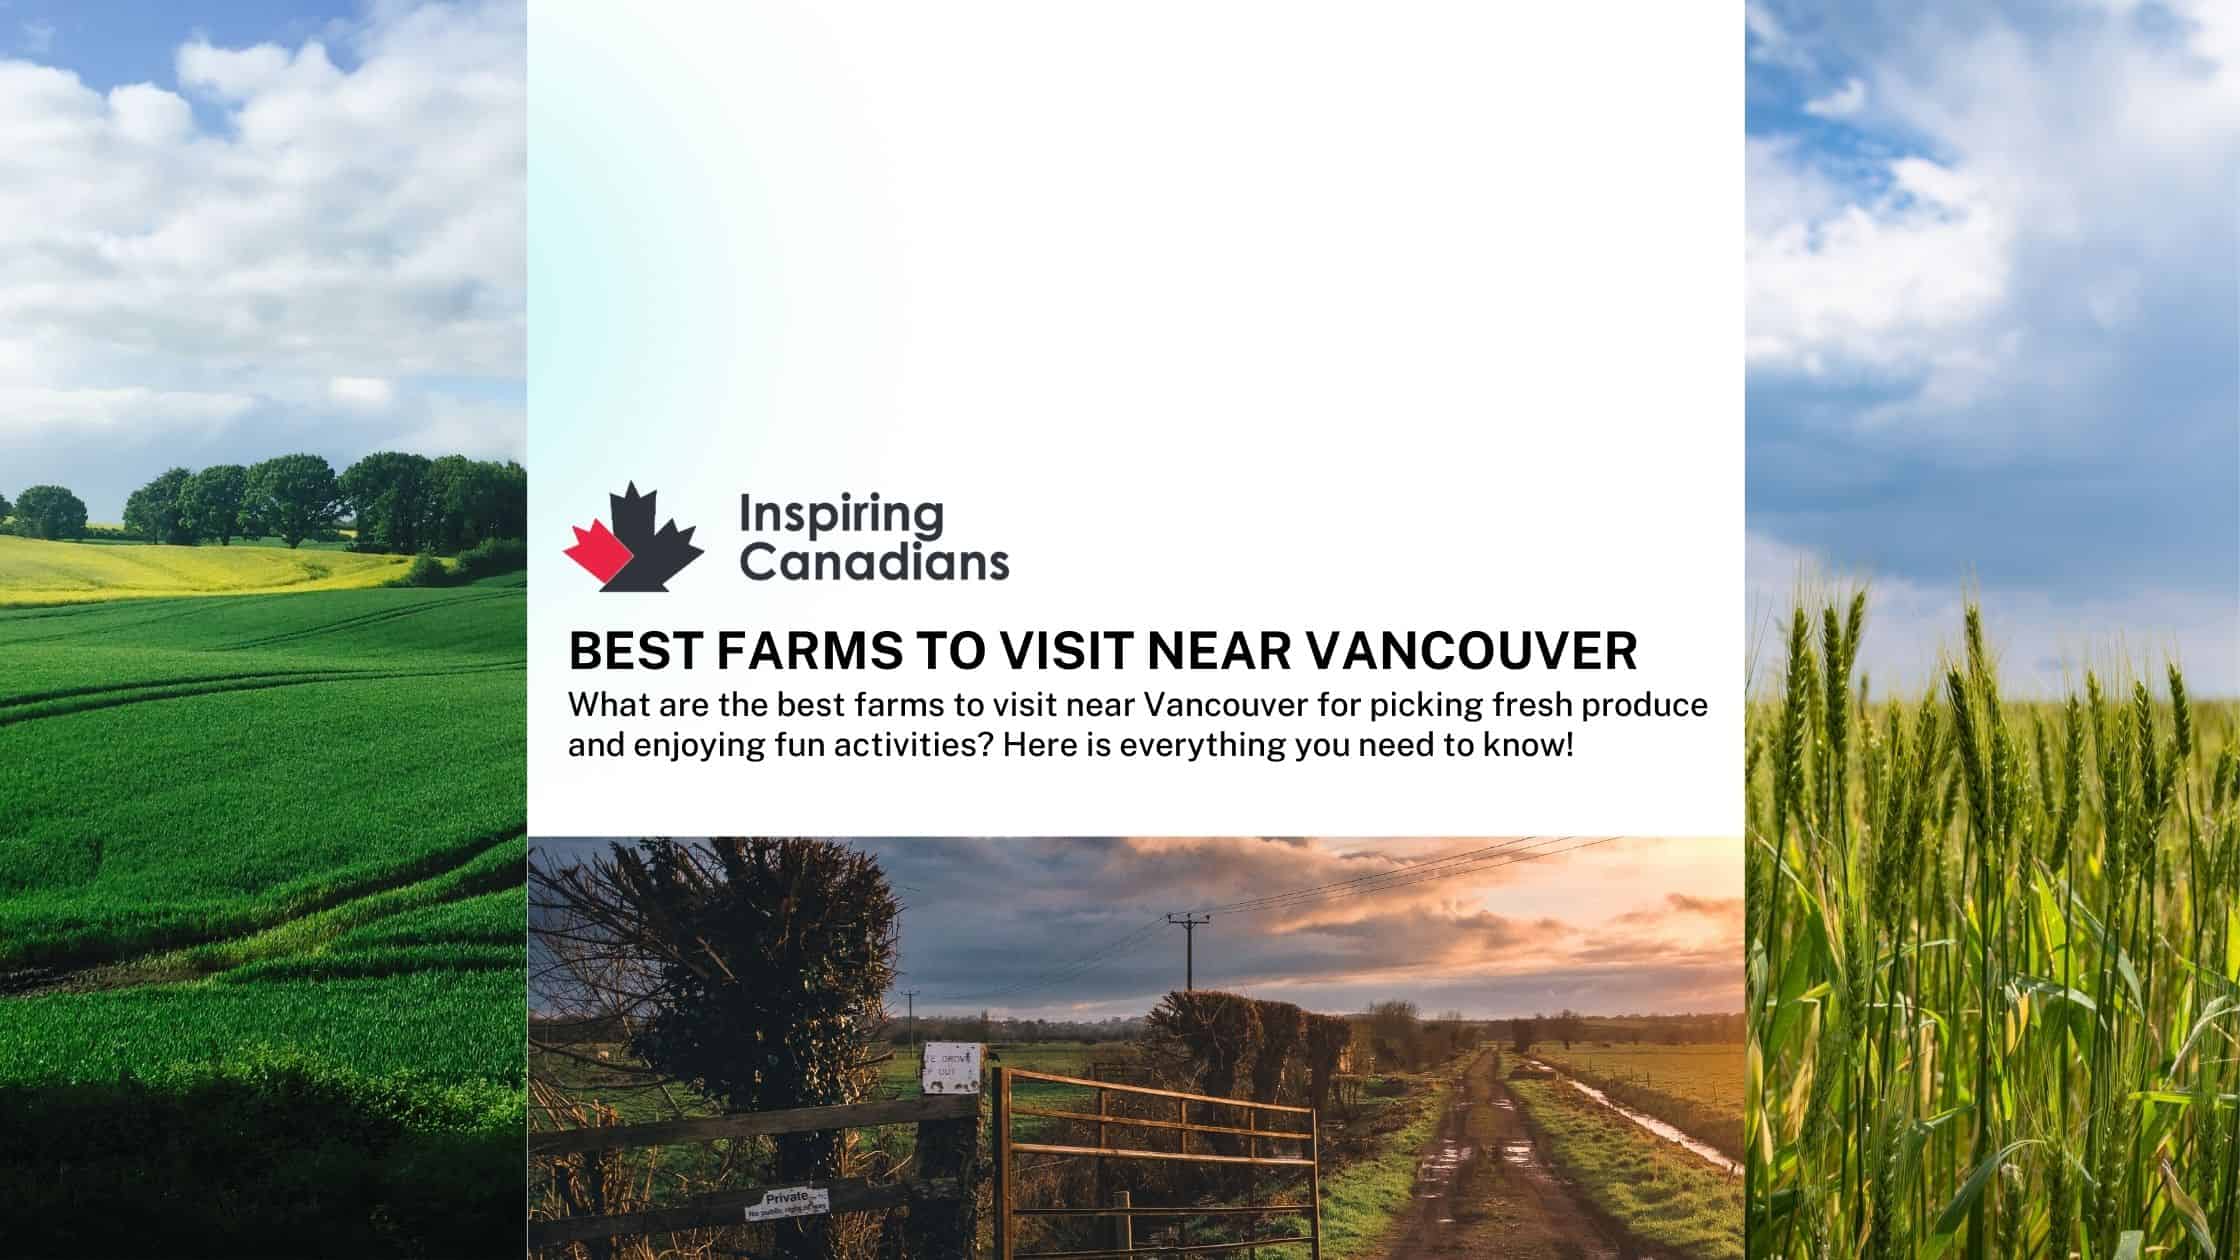 Best farms to visit near Vancouver